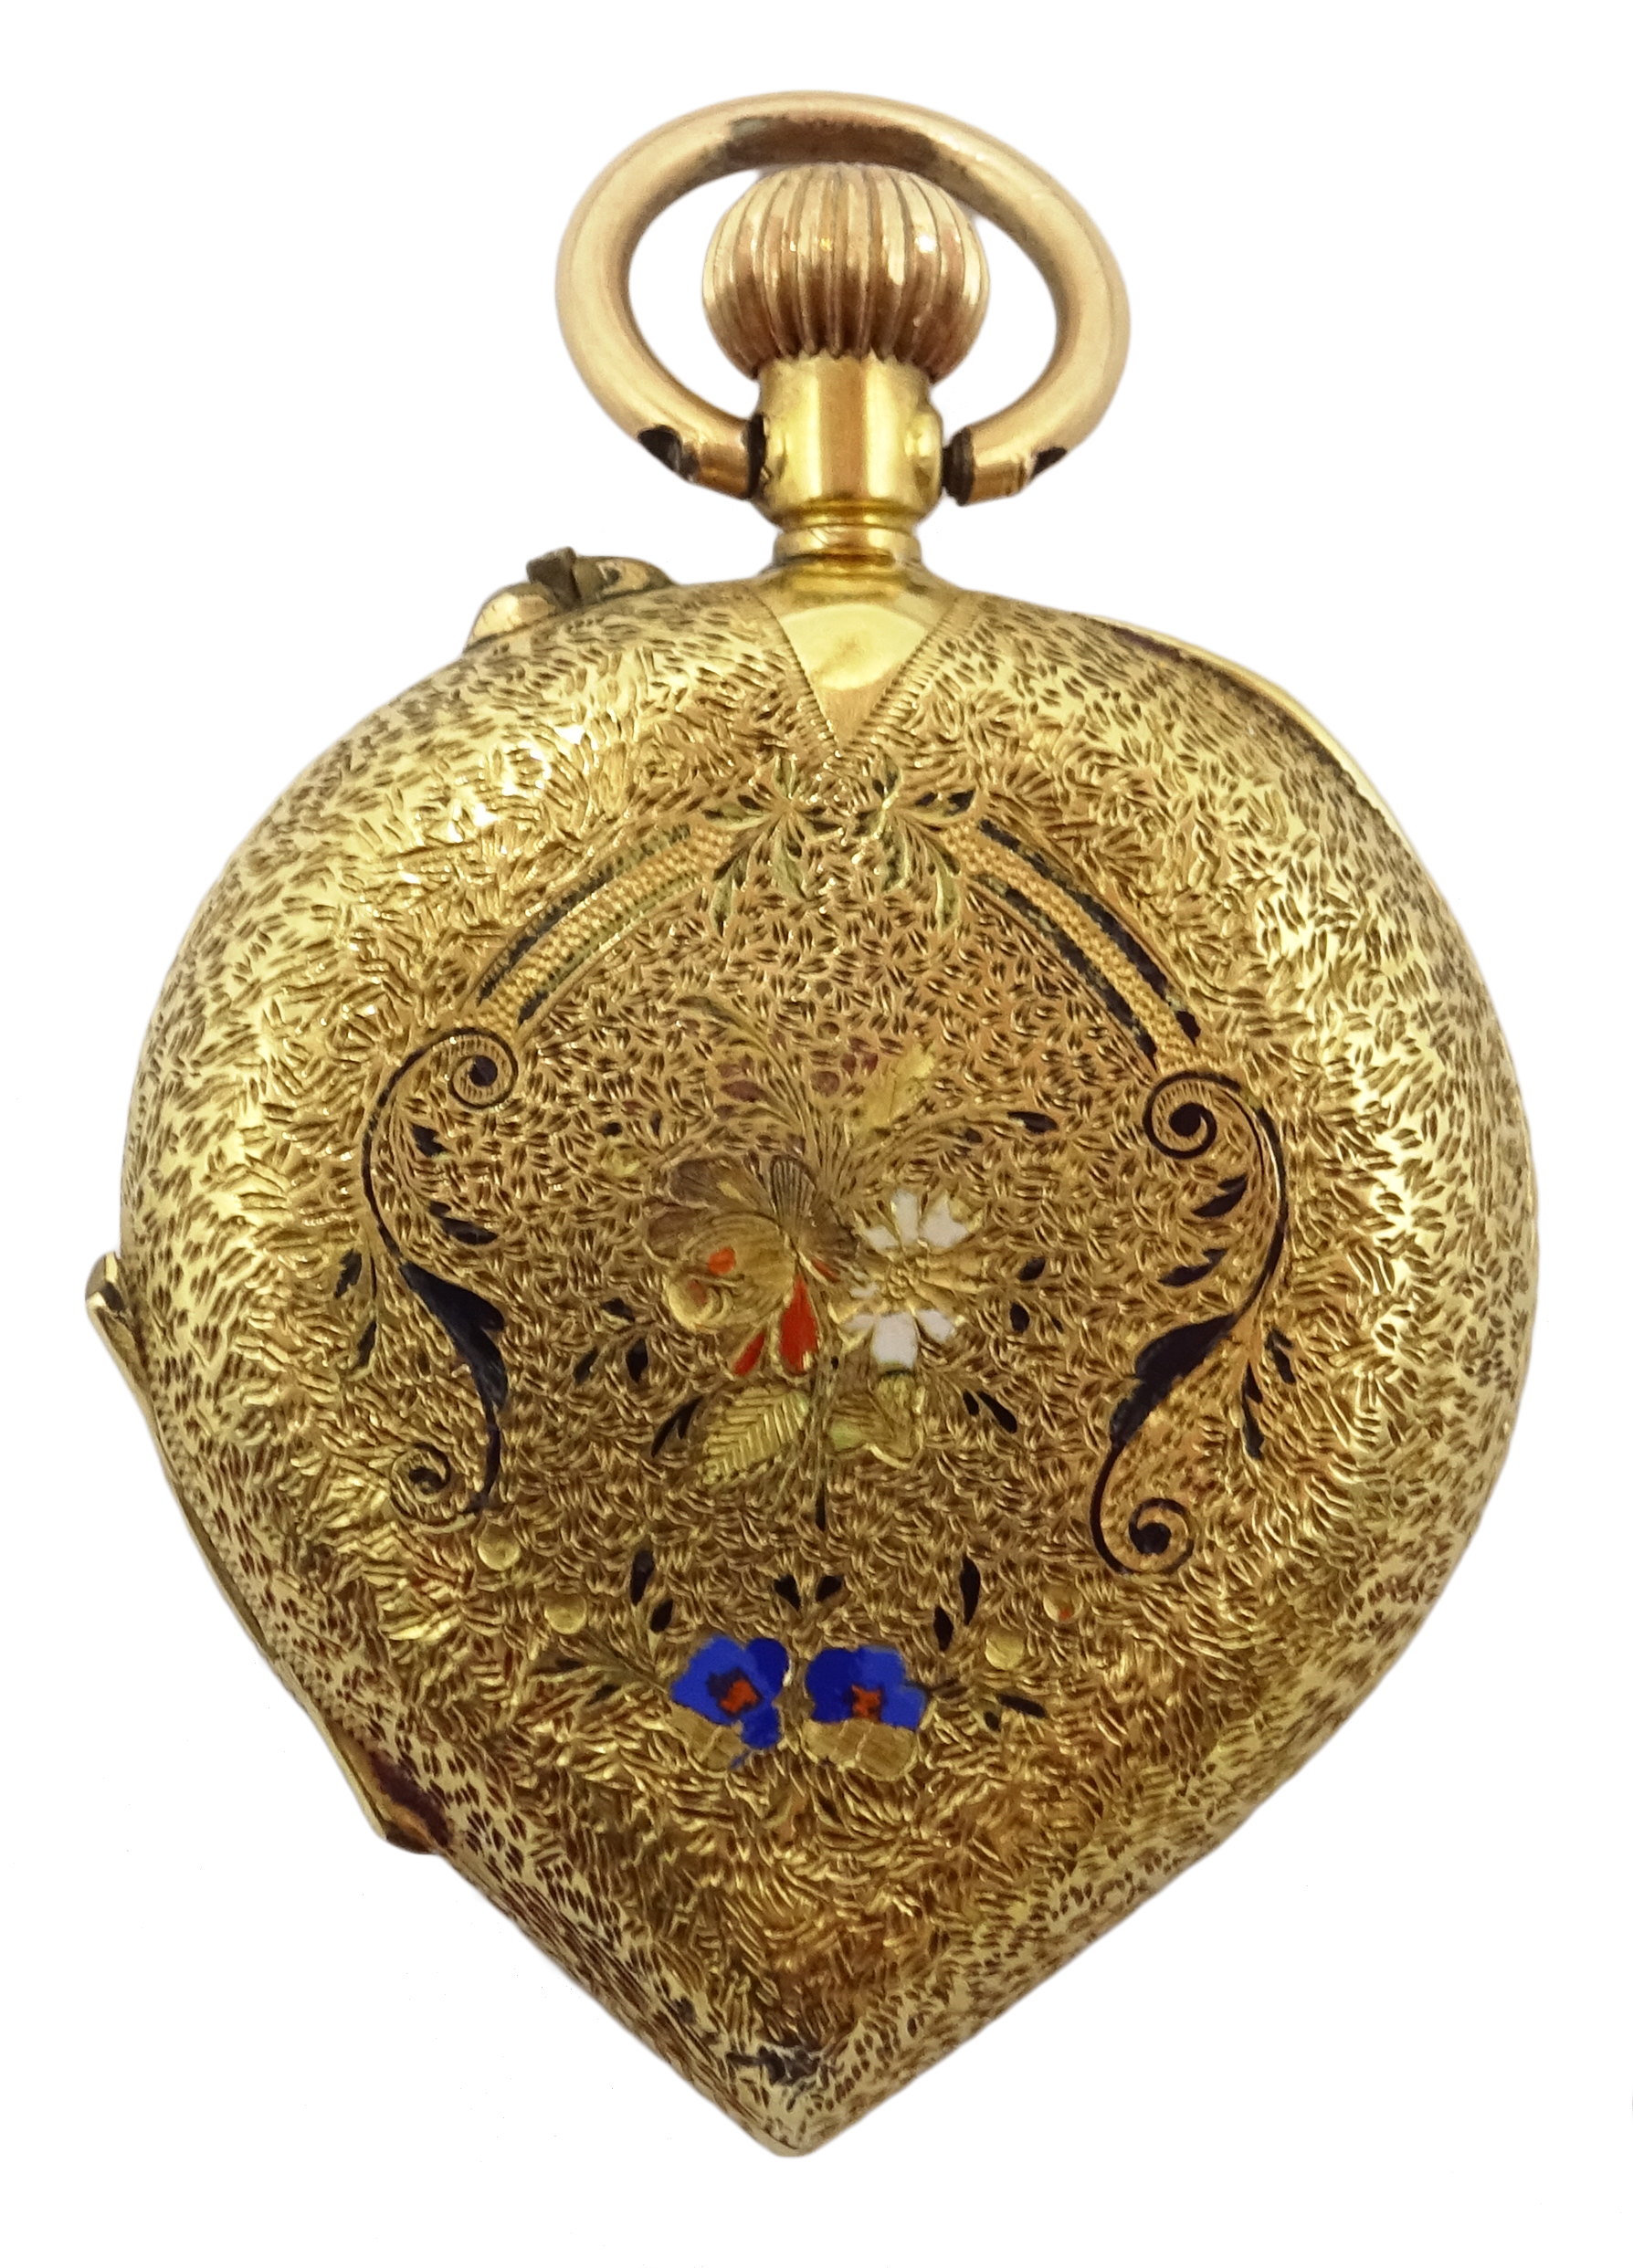 18ct gold and enamel French fob watch stamped 18k no 162271,16. - Image 2 of 4